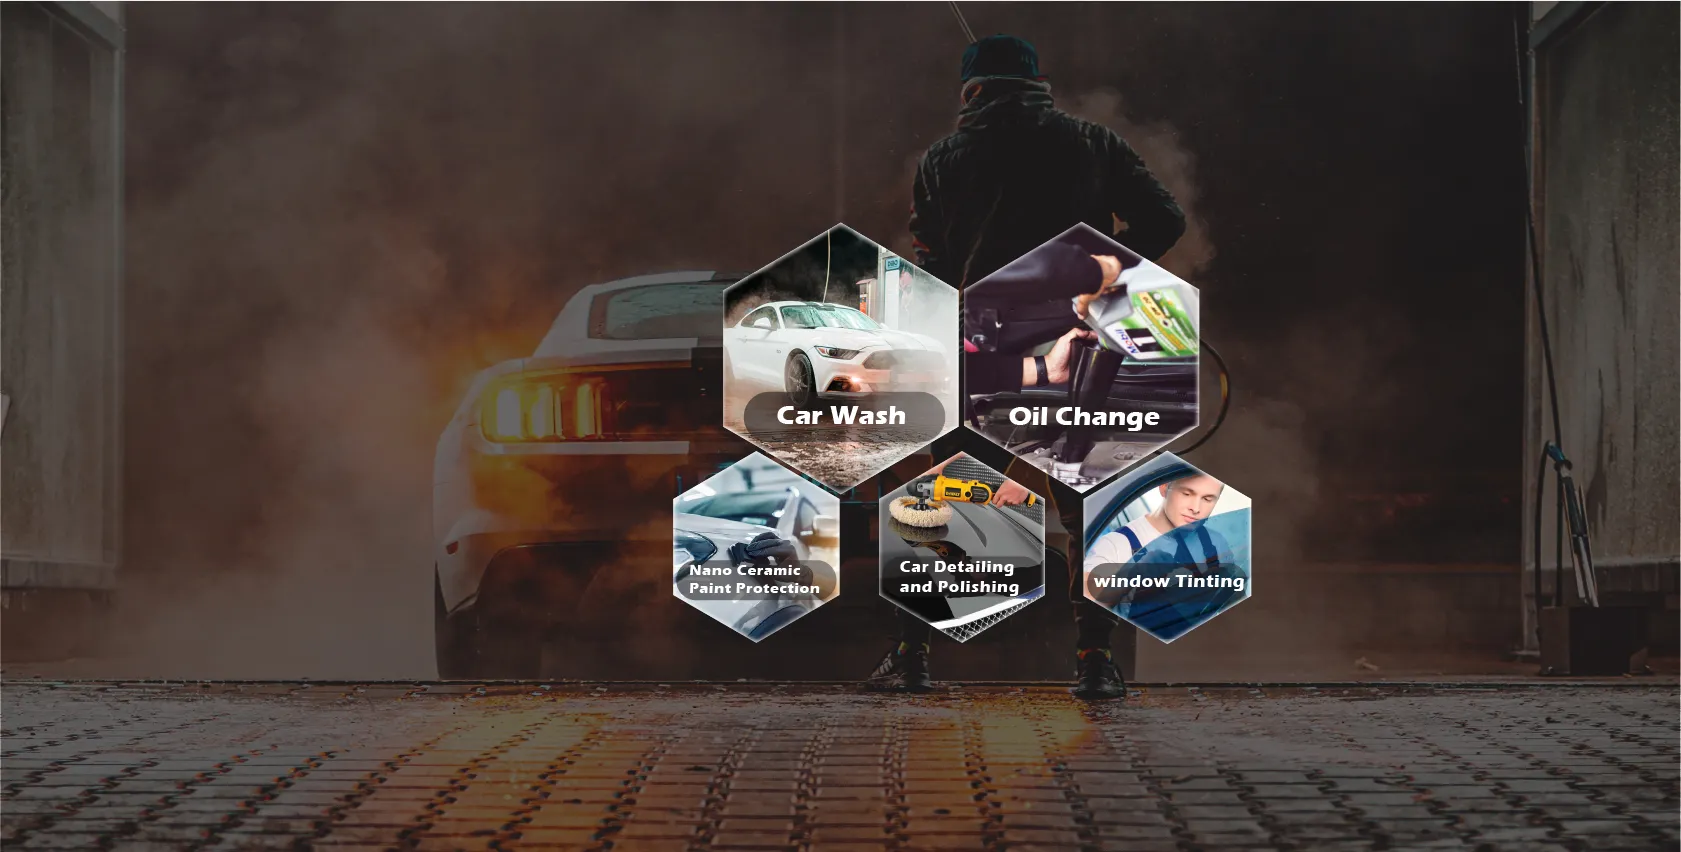 Welcome to RAS Auto Care, your trusted destination for professional automotive services